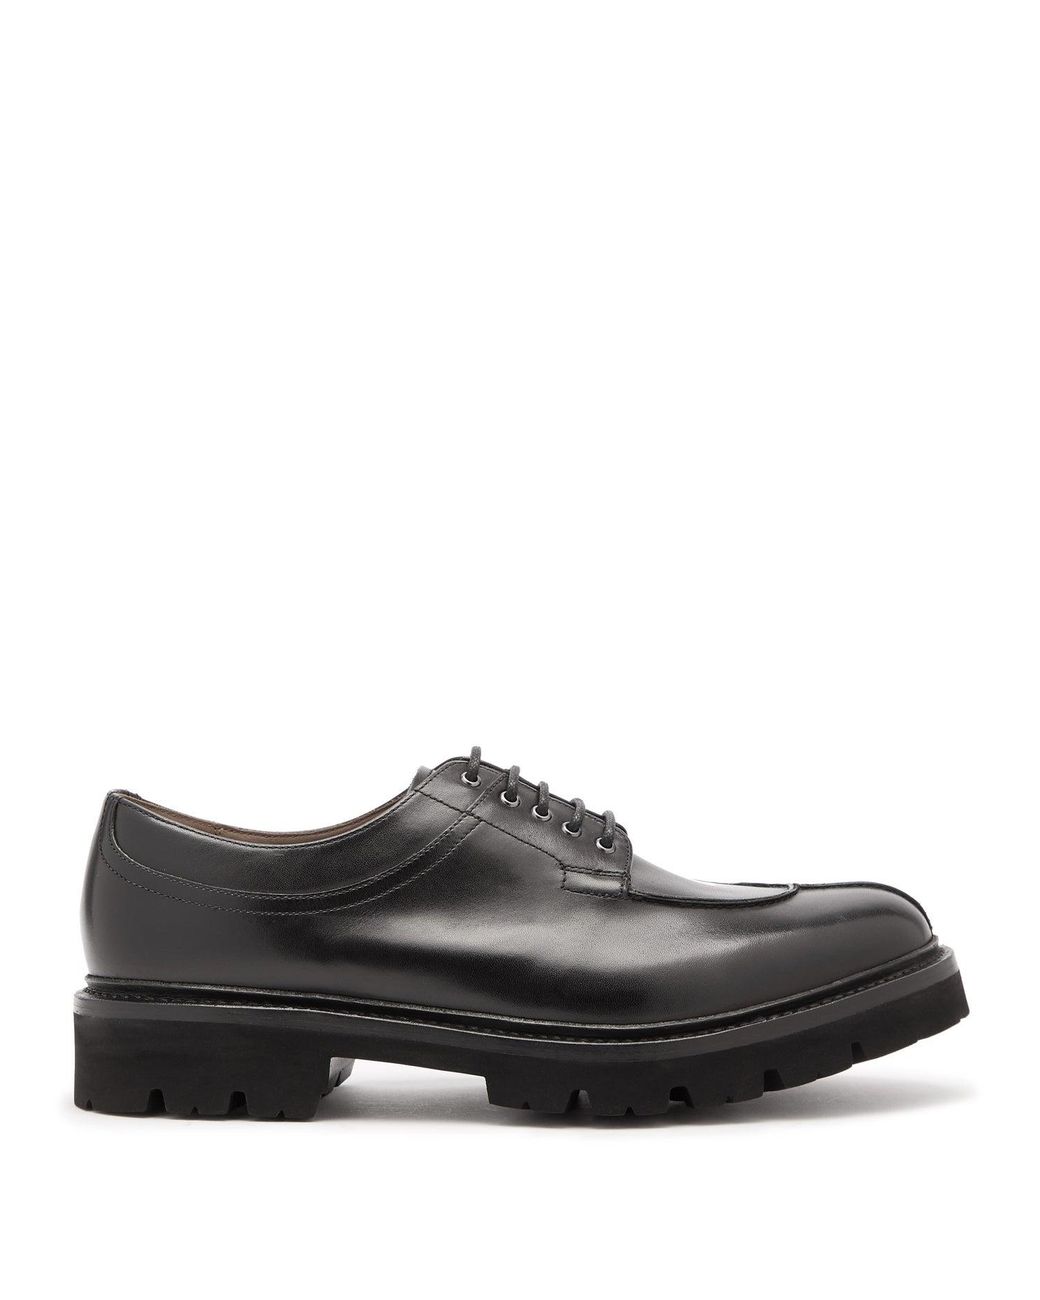 Grenson Percy Chunky-sole Leather Derby Shoes in Black for Men - Lyst